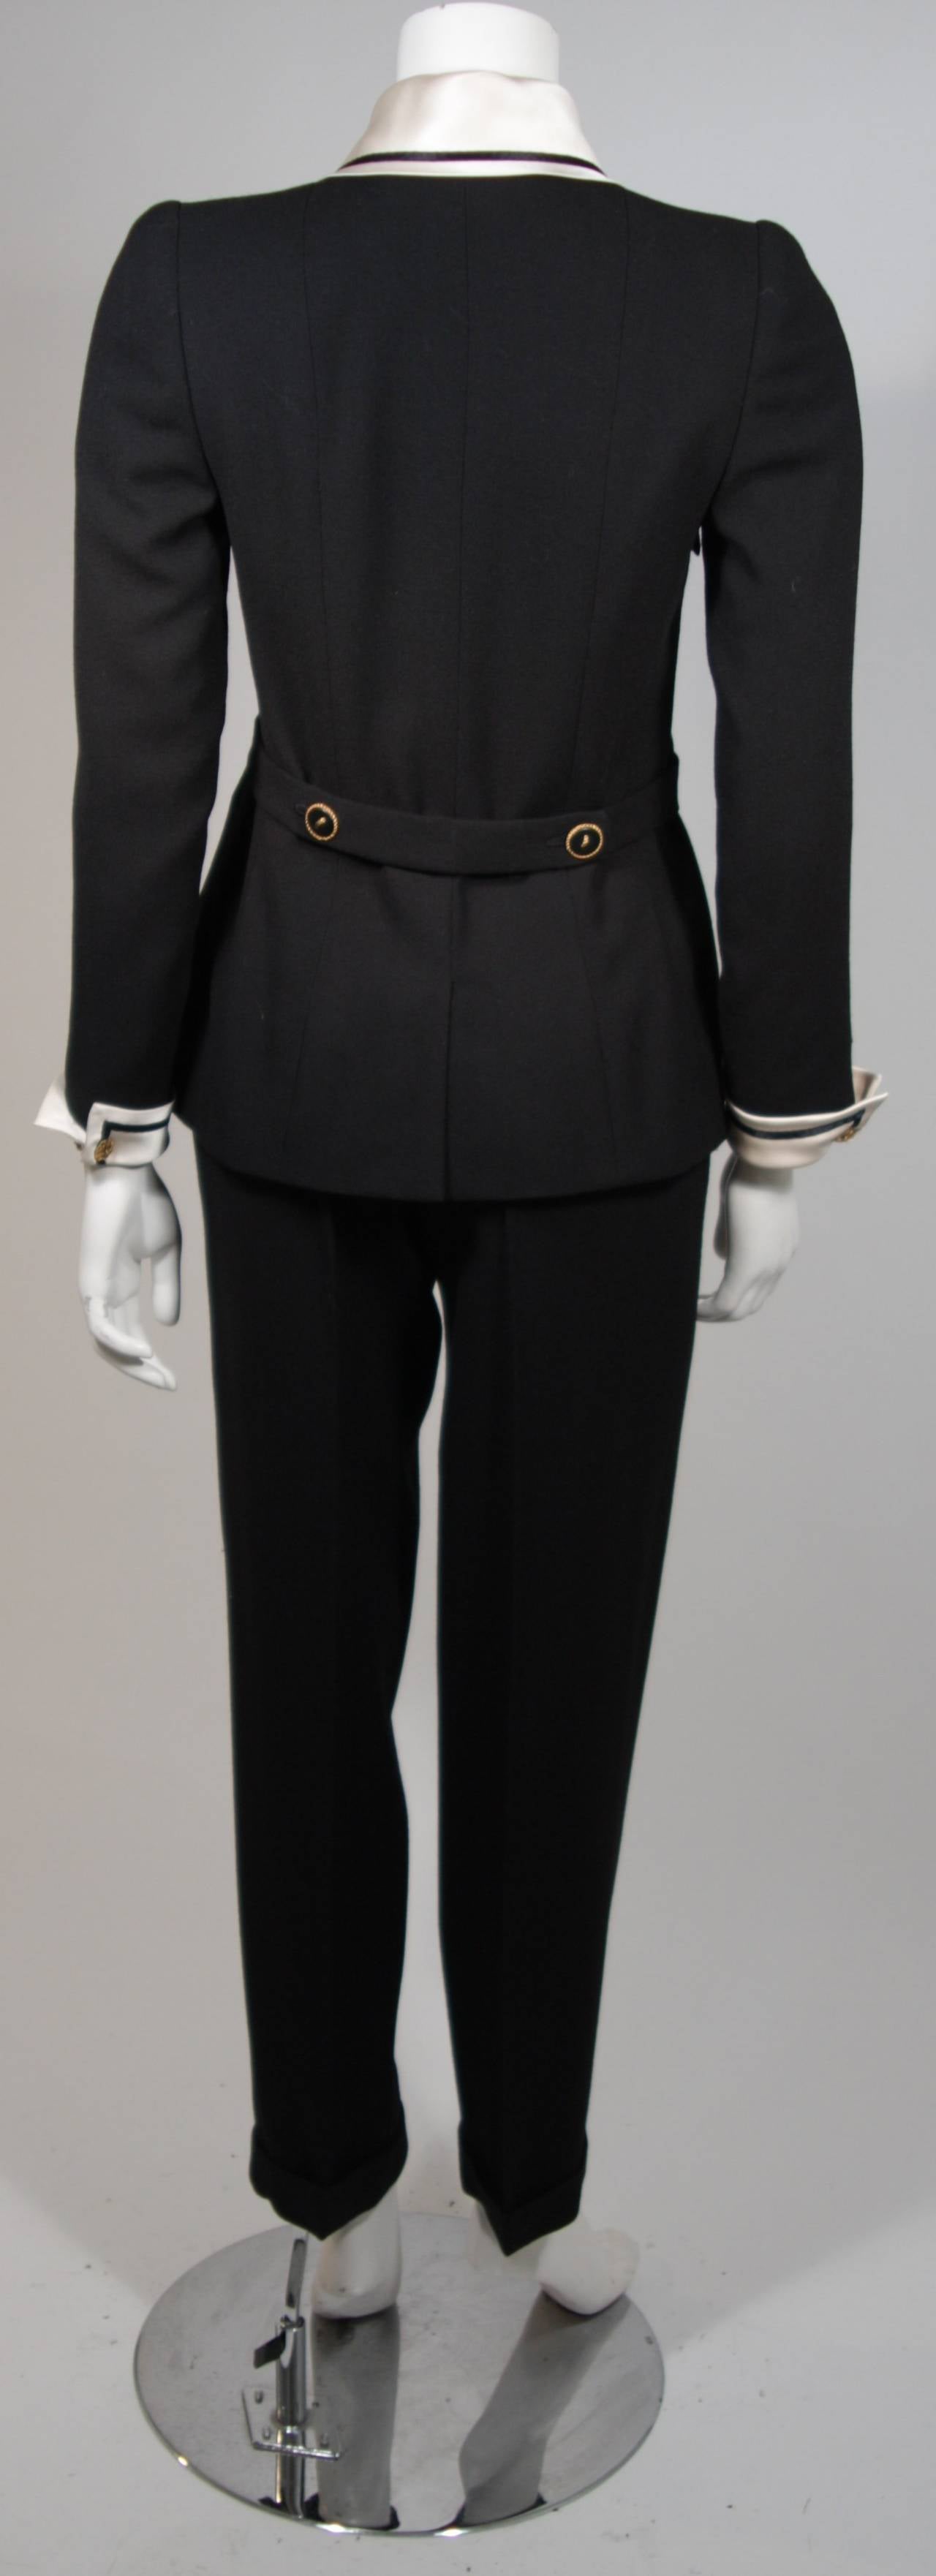 Chanel Haute Couture Black Wool Sailor Inspired Suit Size 2-4 EU 34-36 3